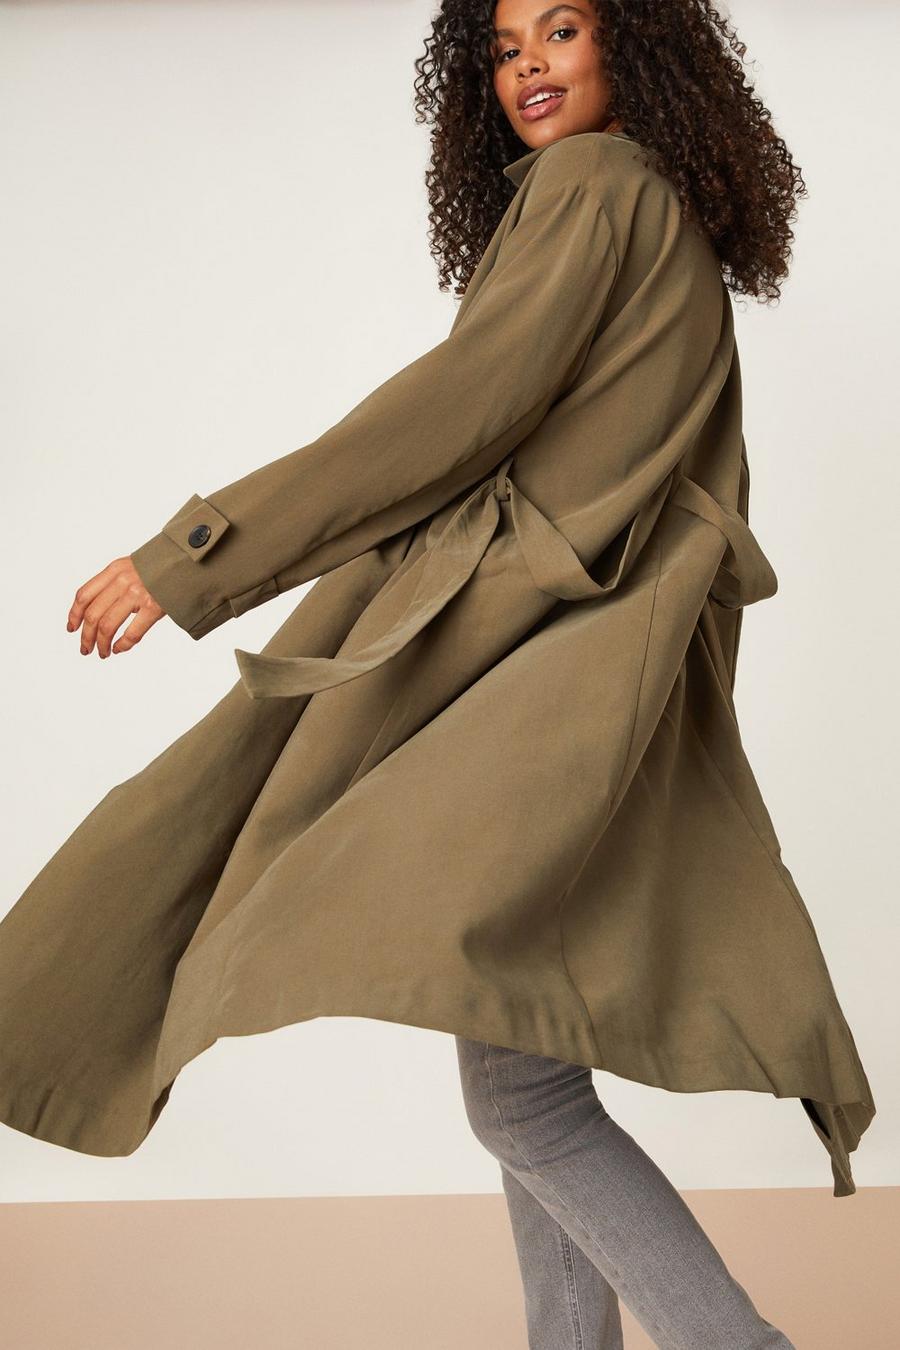 Long Duster Light Weight Trench Coat